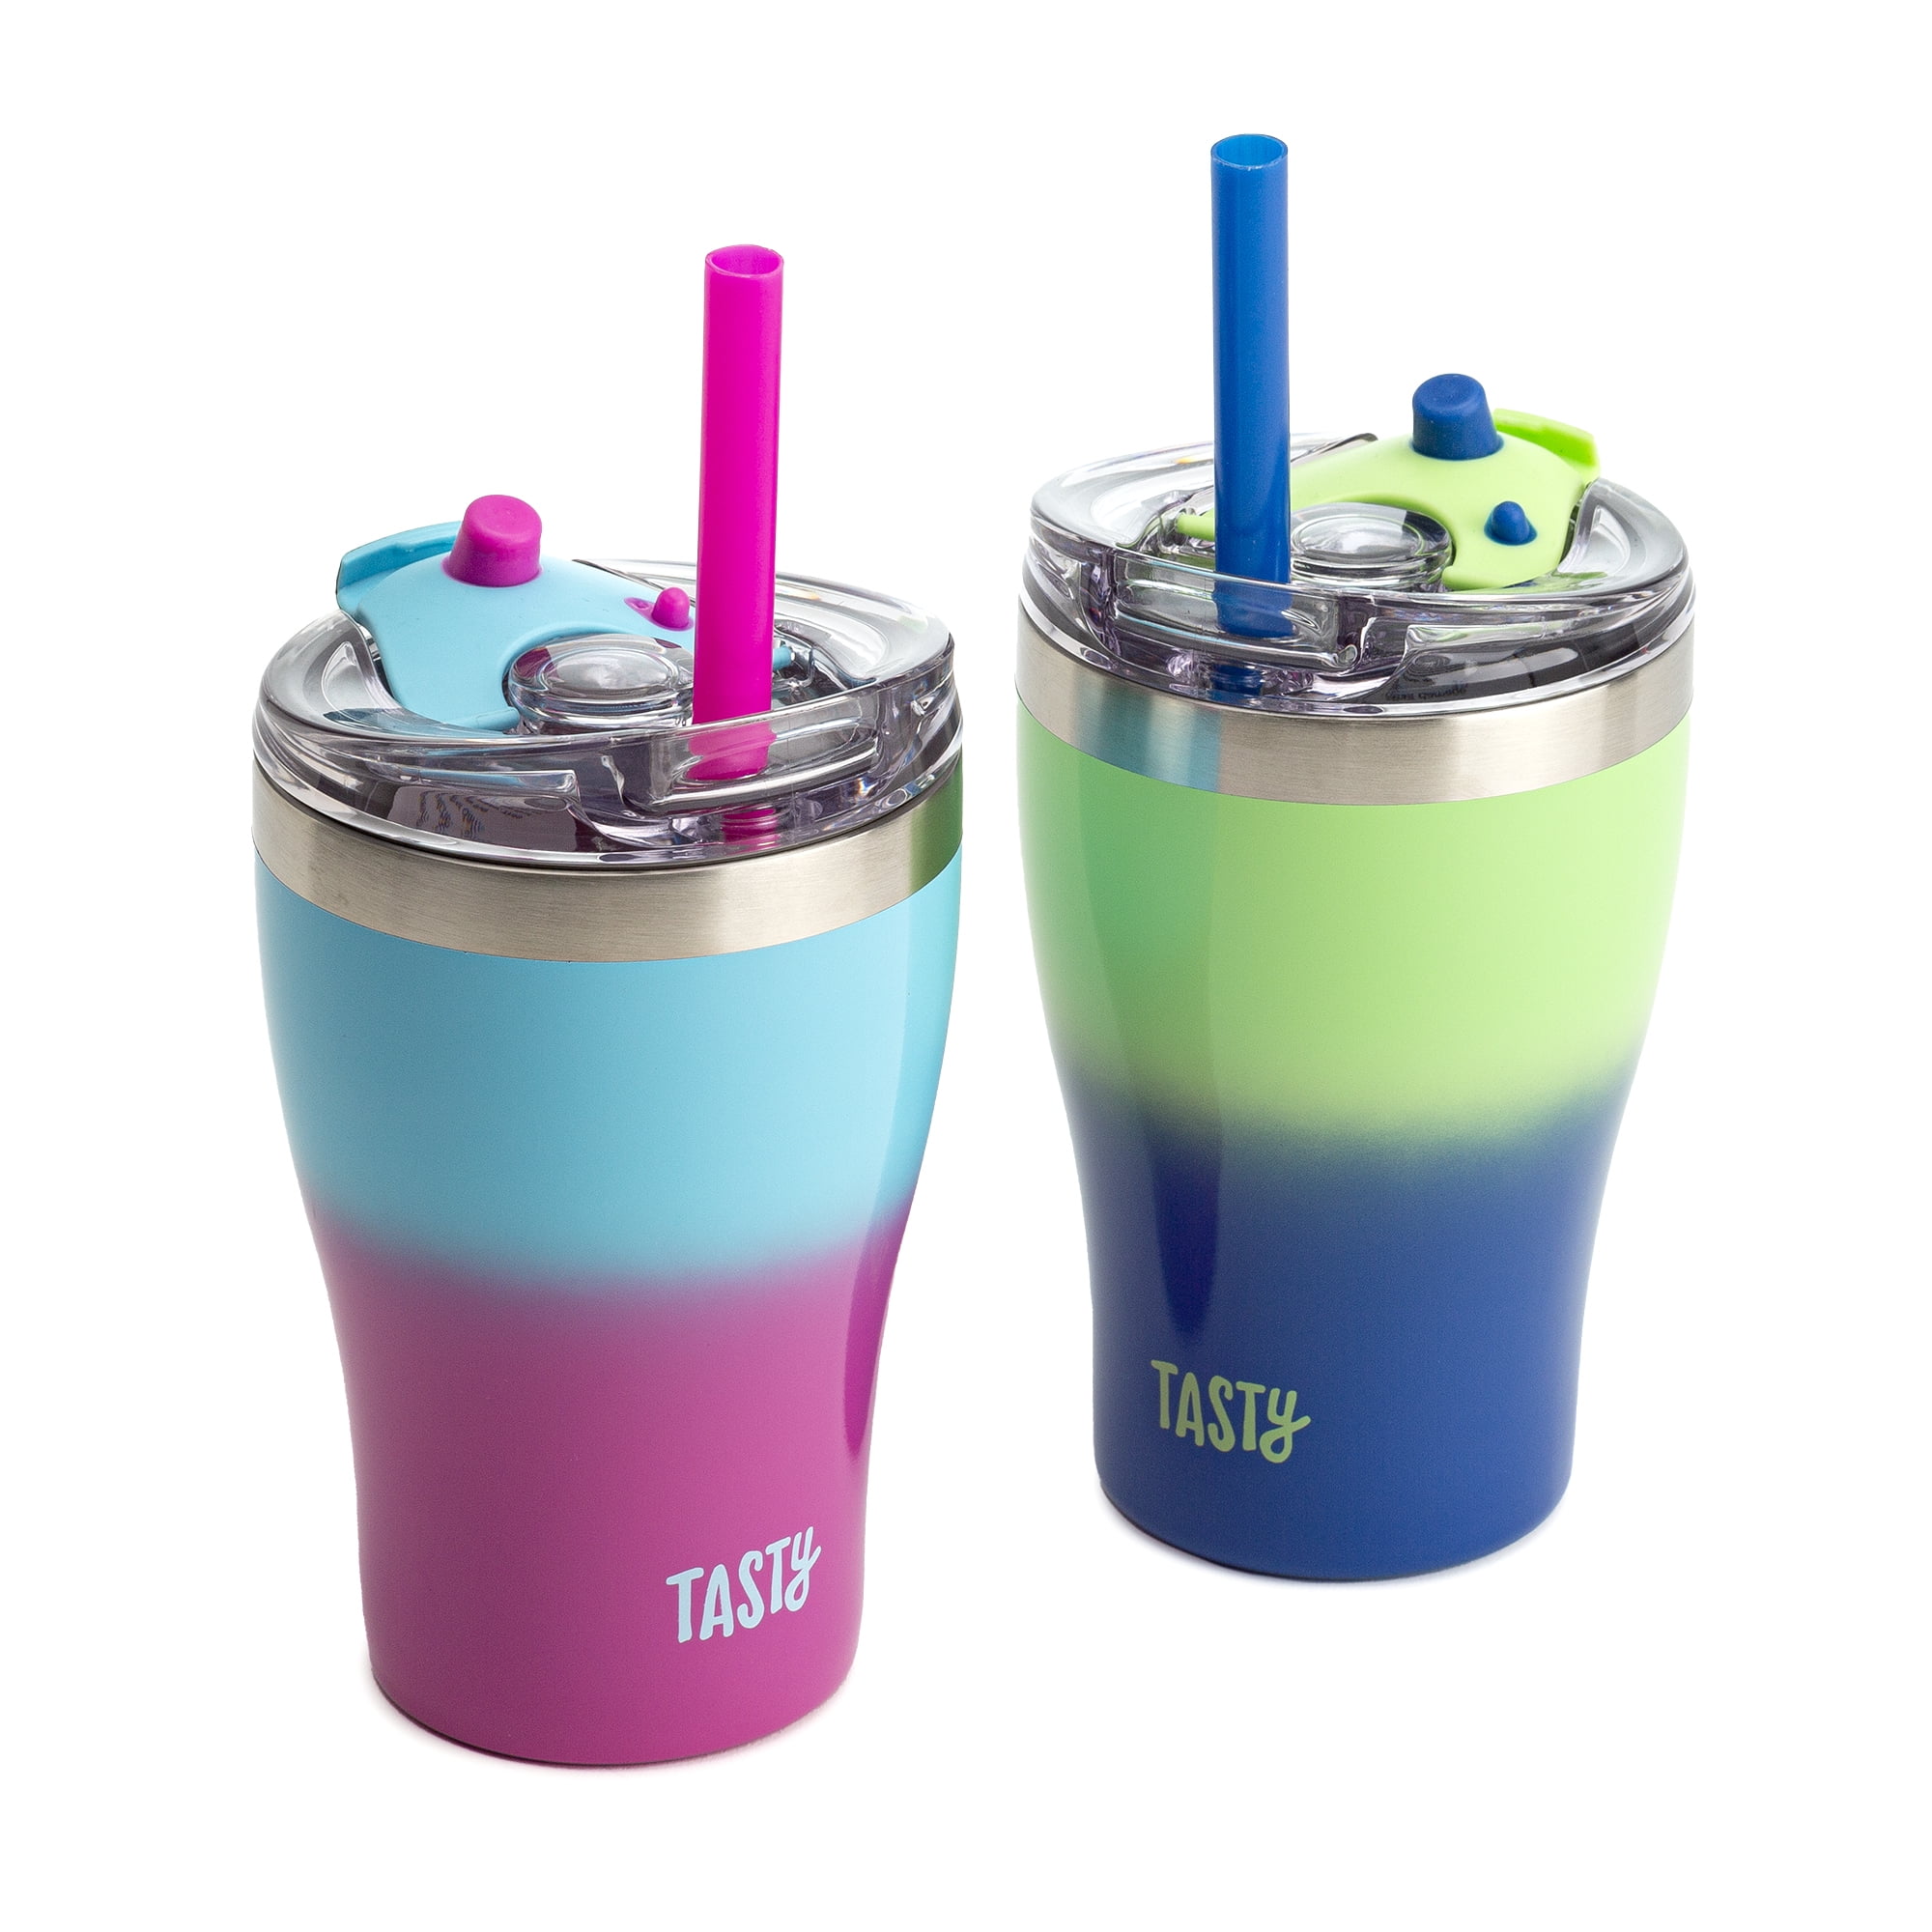 Elefant Kids & Toddler Cups (Set of 2), Stackable Stainless Steel Insulated Tumblers with BPA Free Leak Proof Lids and Reusable Silicone Straws